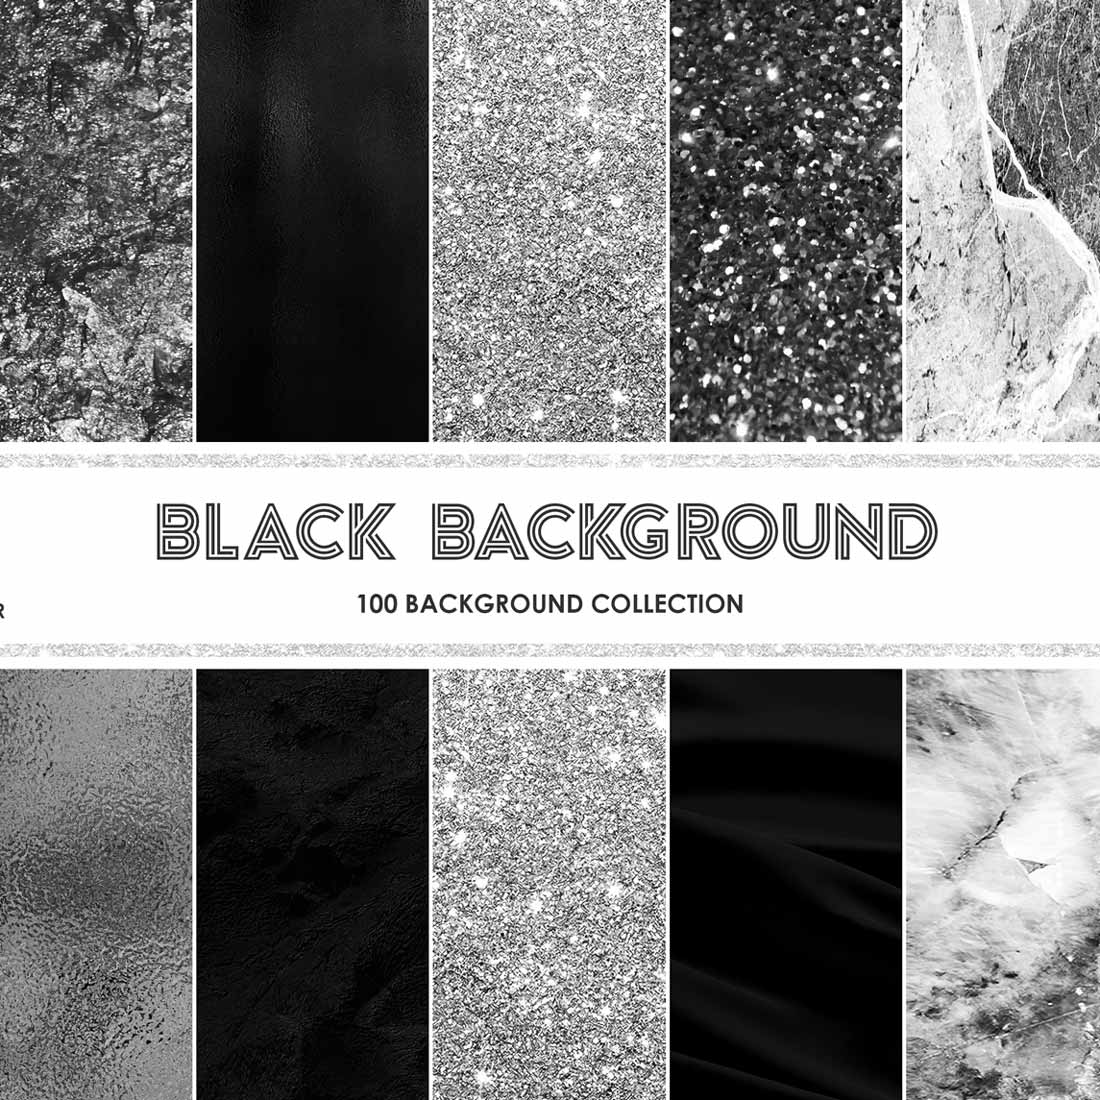 Black backgrounds collection